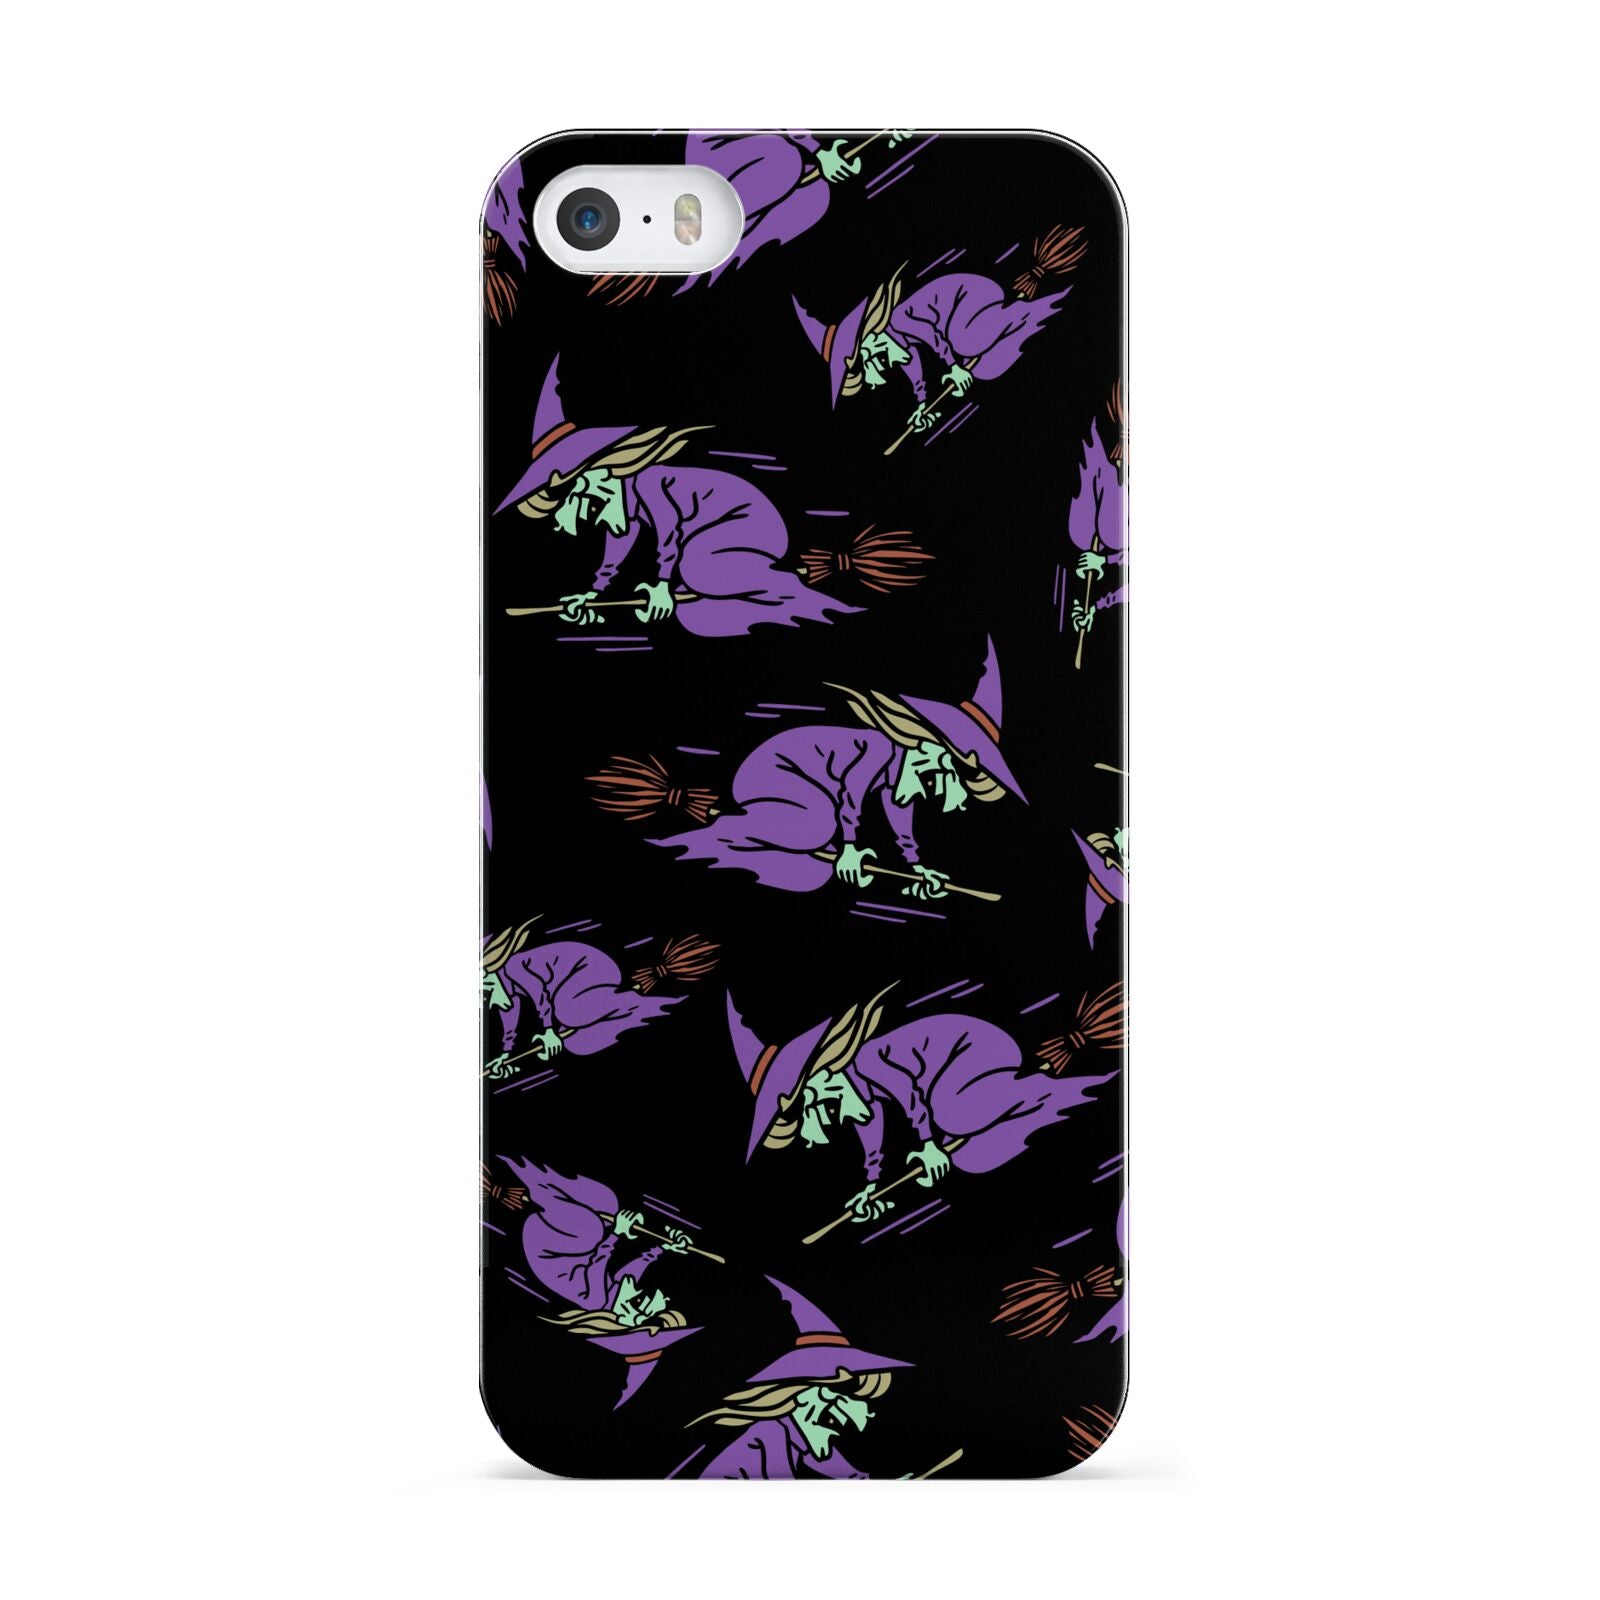 Flying Witches Apple iPhone 5 Case